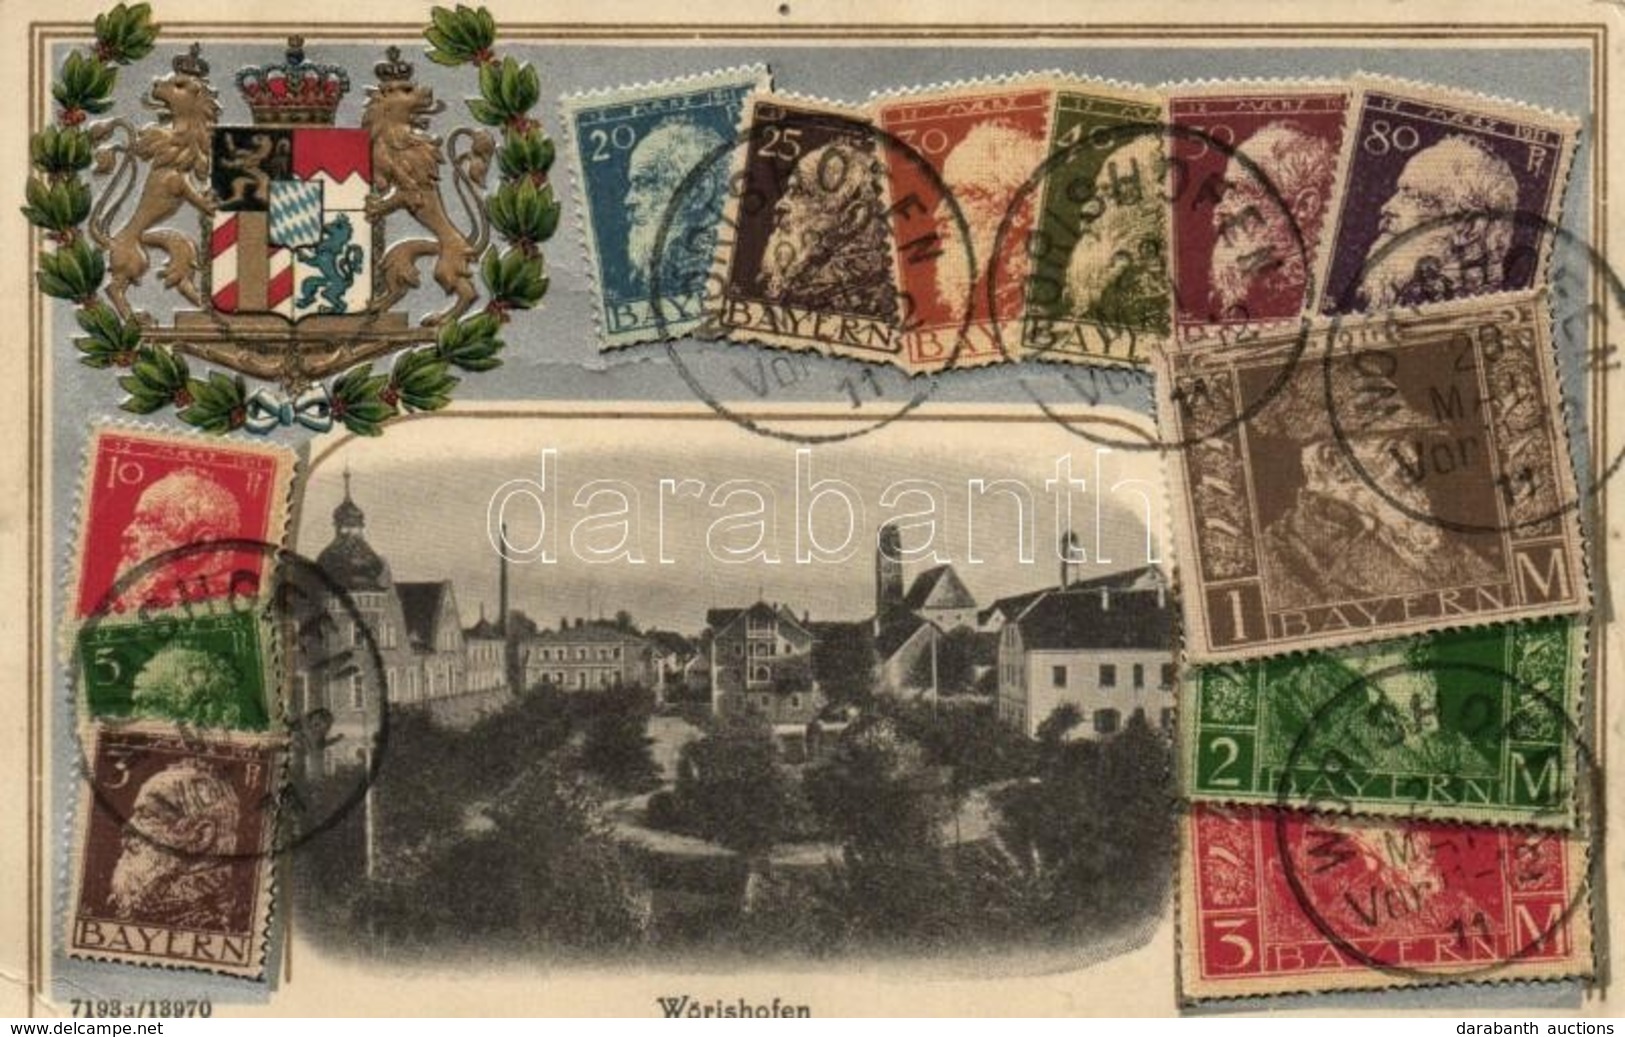 T4 Bad Wörishofen, Set Of Stamps, Coat Of Arms, H.G.Z. & Co. No. 13970. Emb. Litho (pinholes) - Unclassified